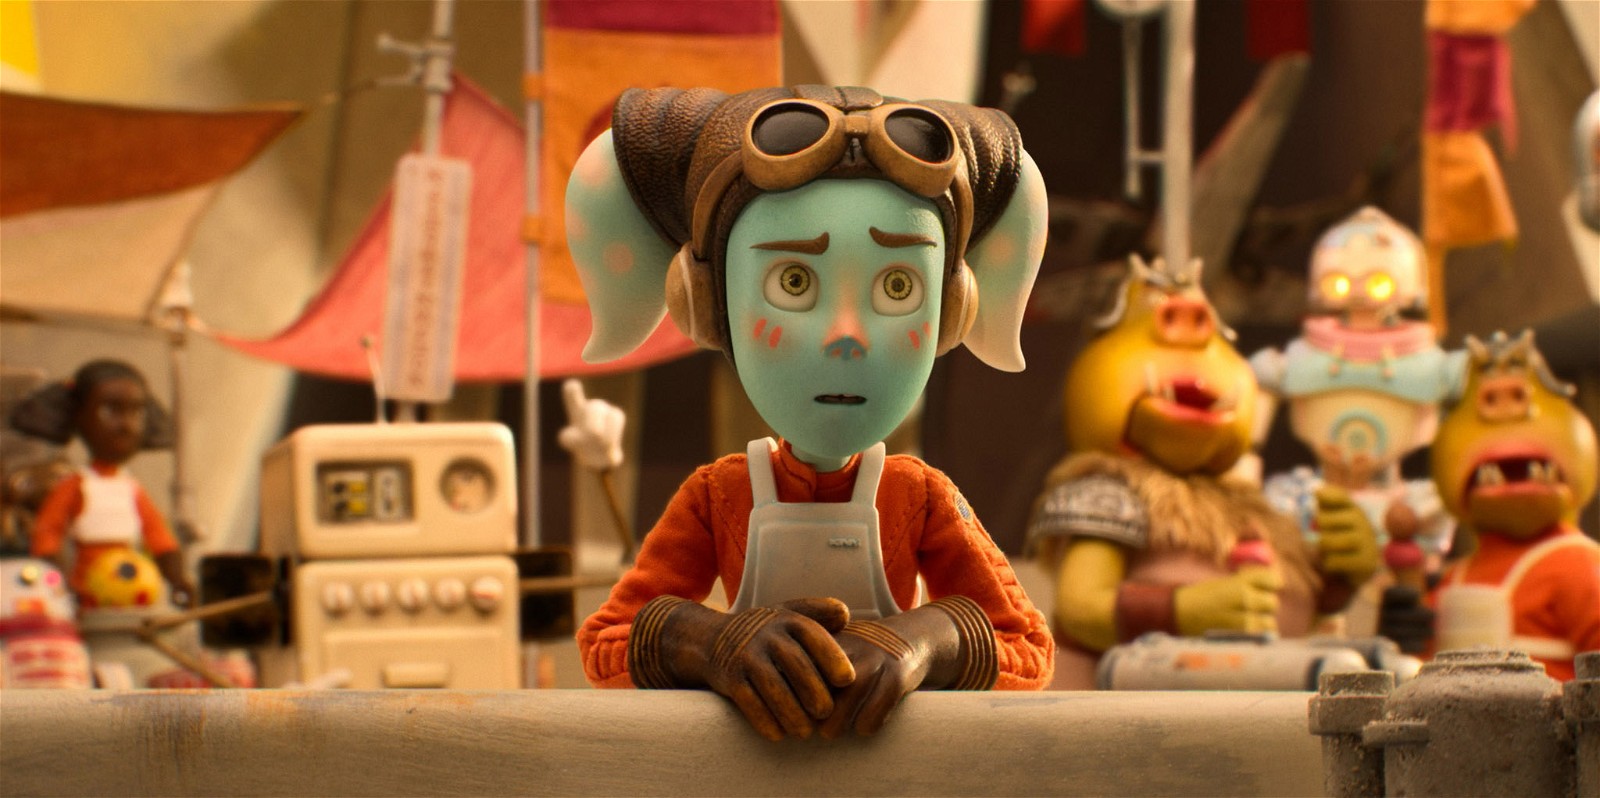 Anni in a scene from the "STAR WARS: VISIONS, Volume 2” short by Aardman, “I AM YOUR MOTHER”, exclusively on Disney+. ©2023 Lucasfilm Ltd. & TM. All Rights Reserved.